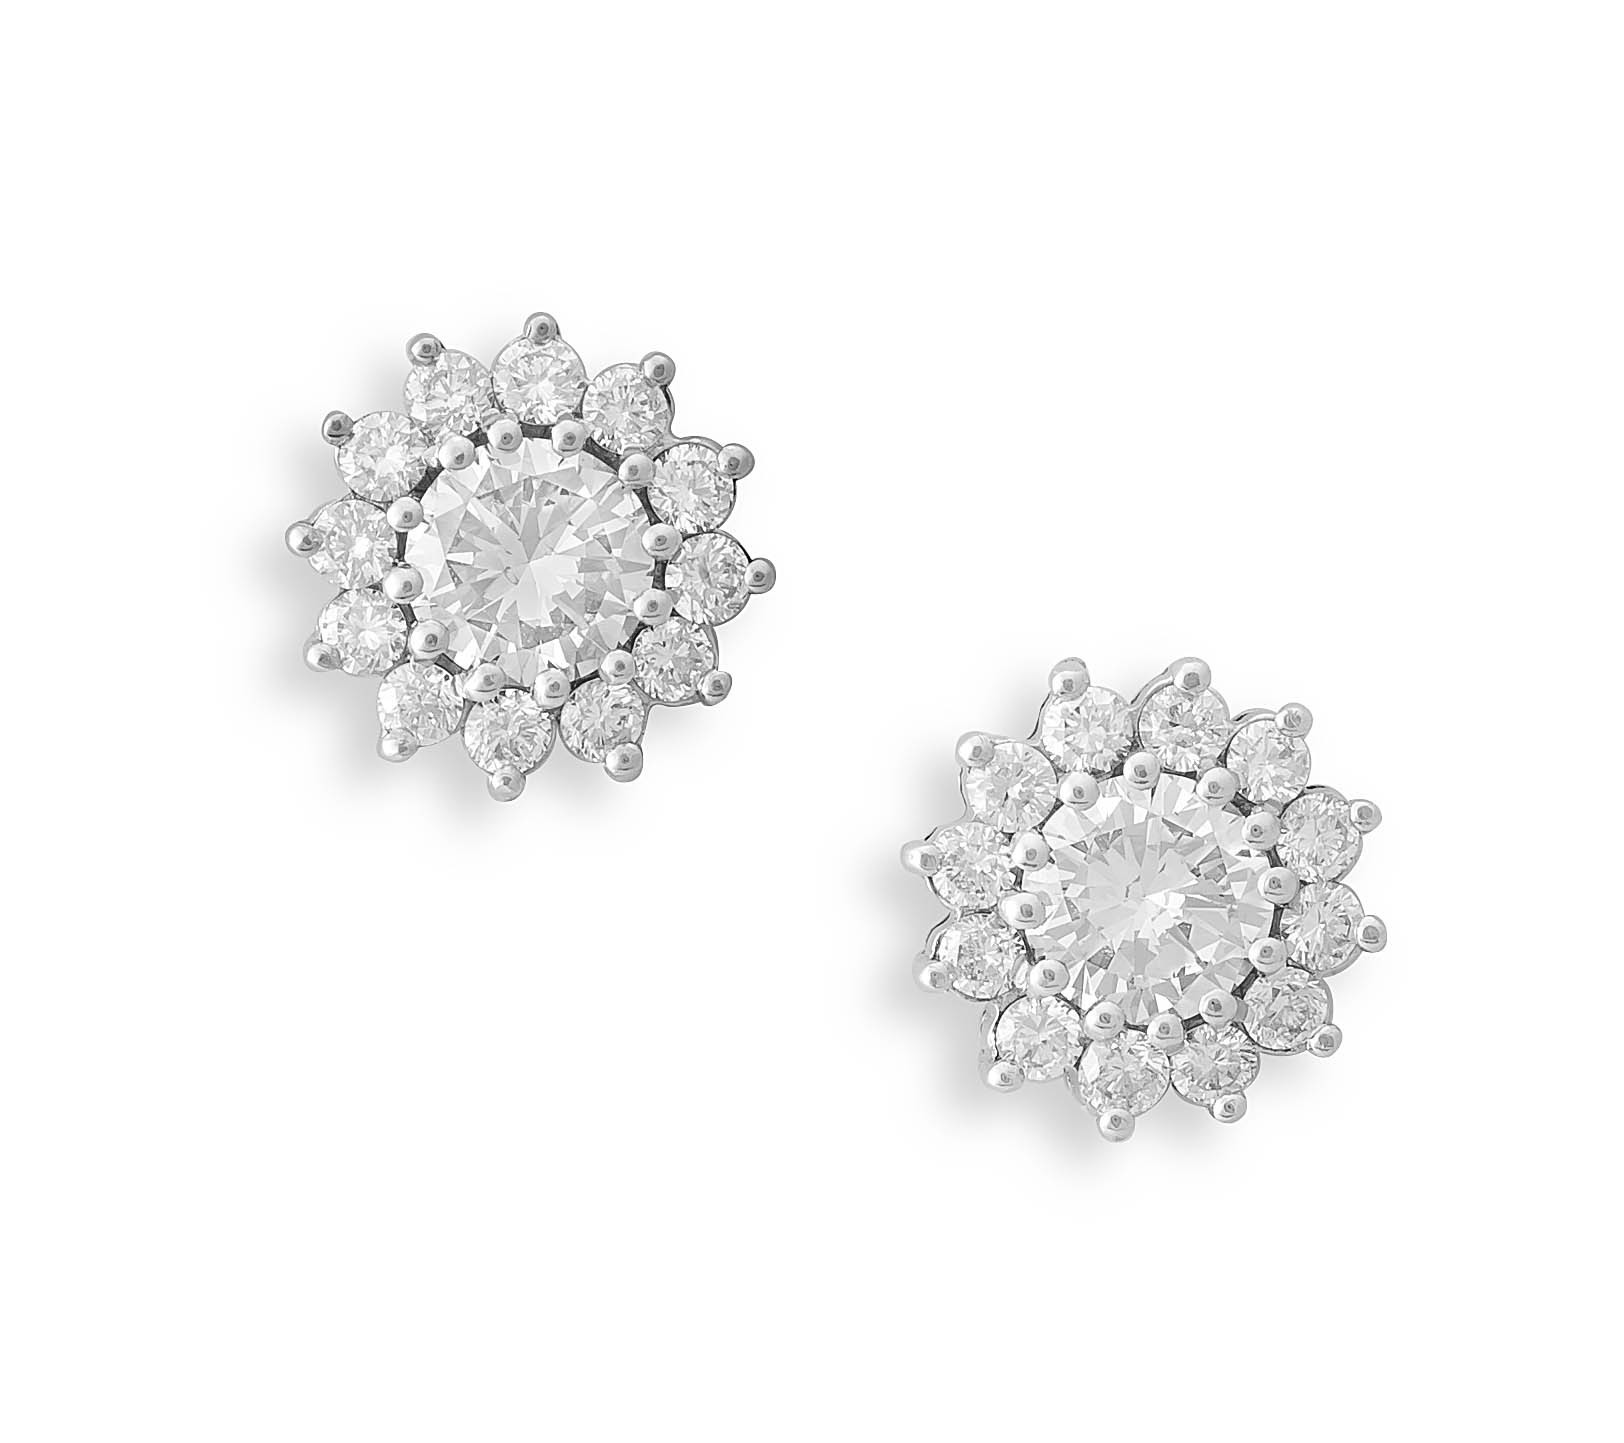 Pair of diamond and white gold earrings